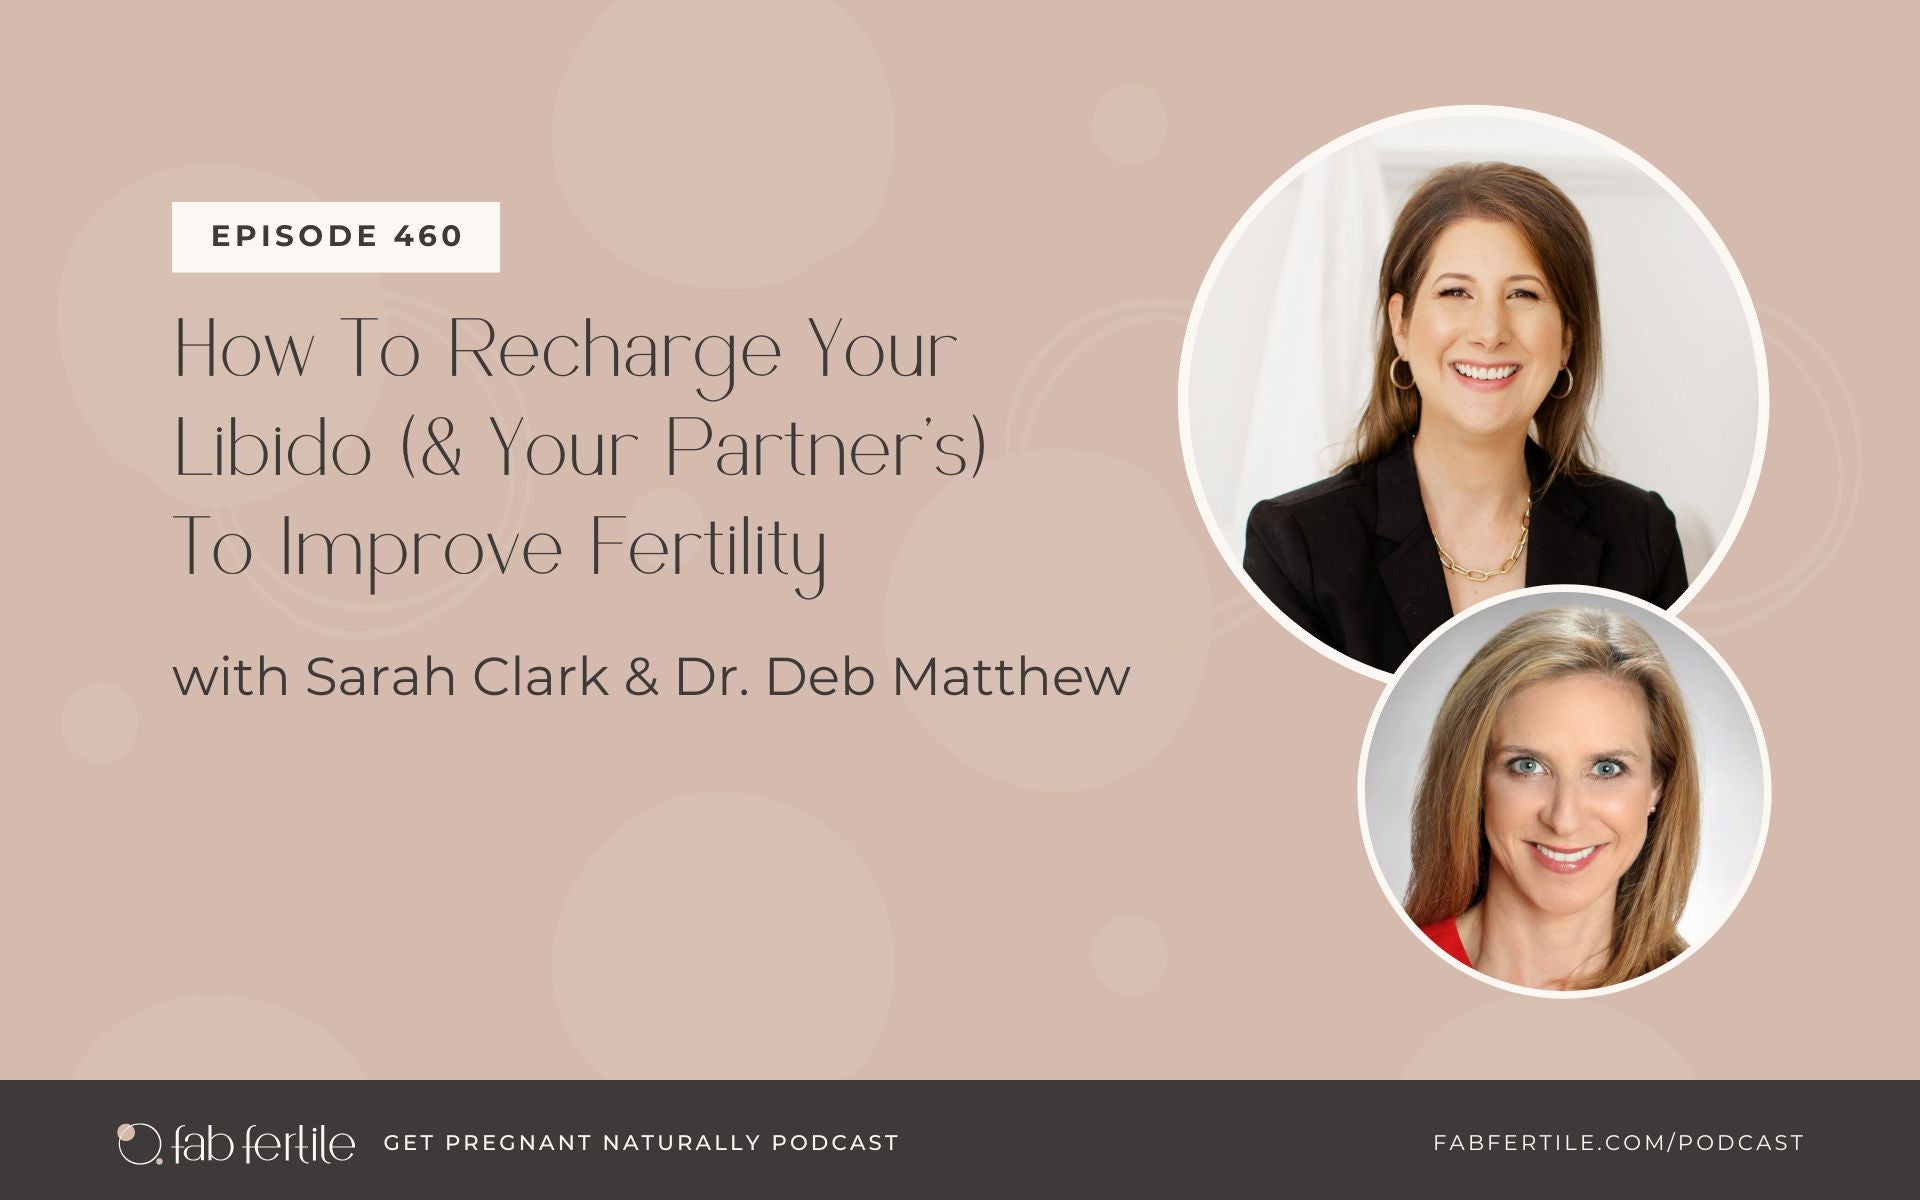 How To Recharge Your Libido (And Your Partner’s) To Improve Fertility with Dr. Deb Matthew